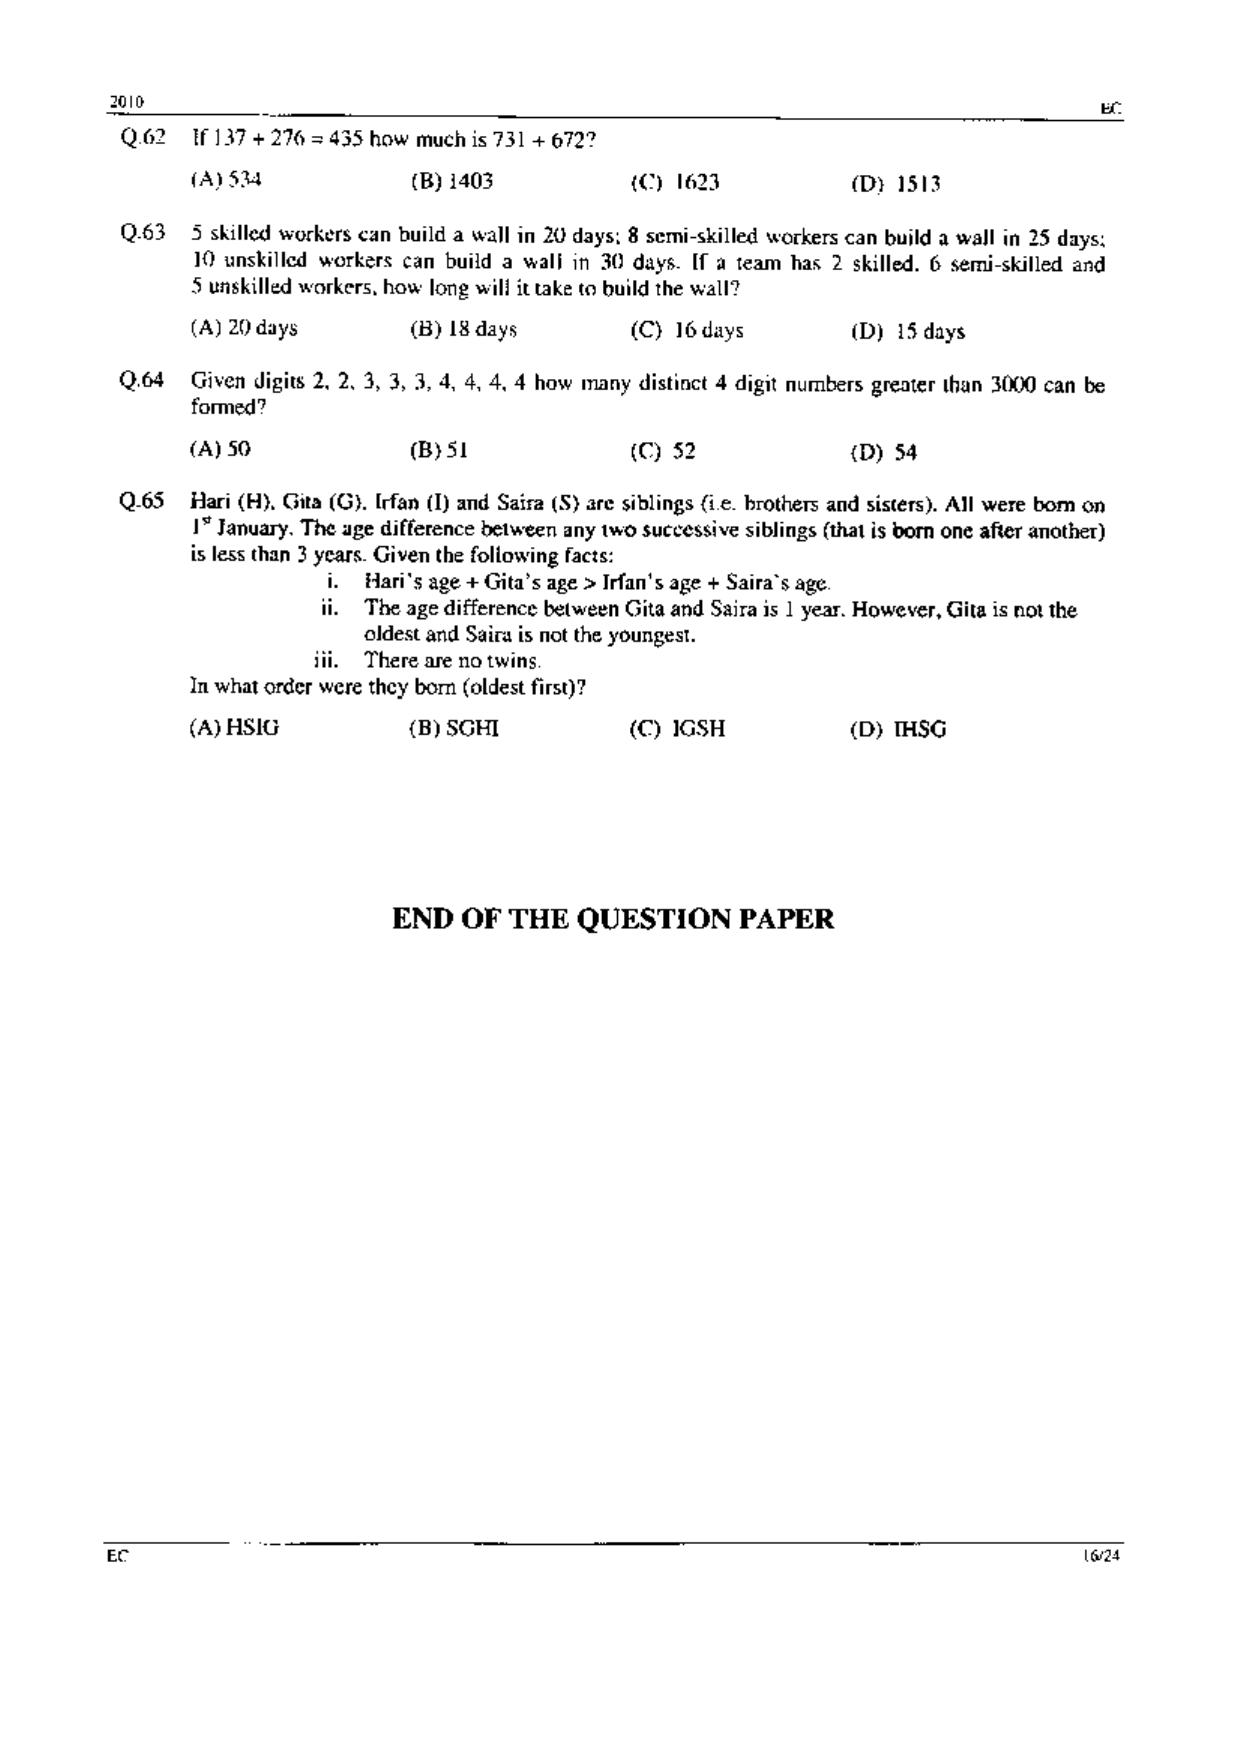 GATE 2010 Electronics and Communication Engineering (EC) Question Paper with Answer Key - Page 16